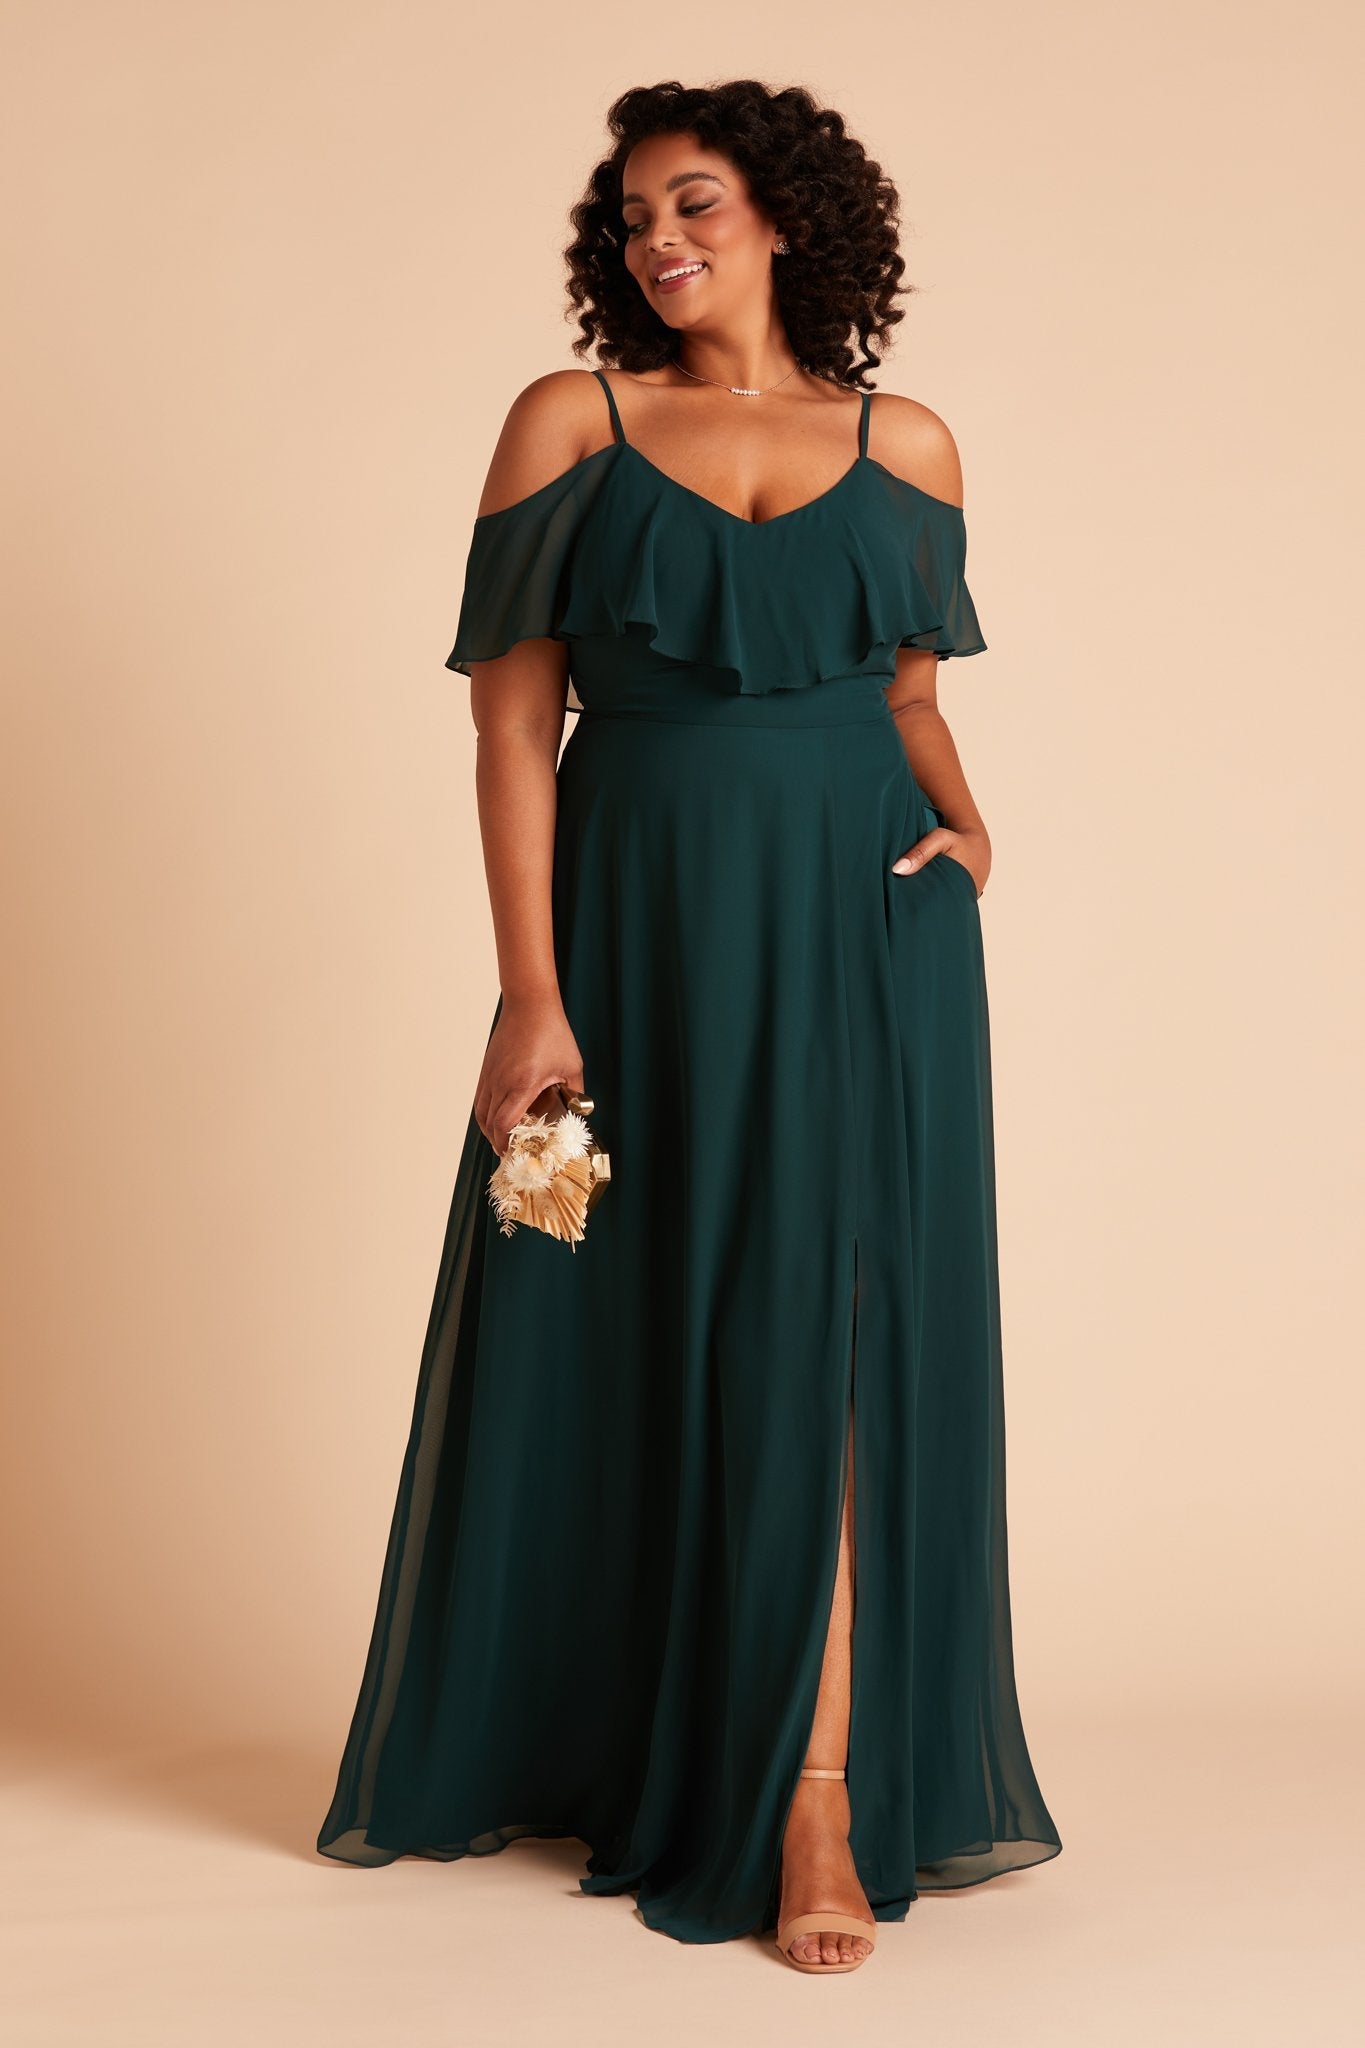 Jane convertible plus size bridesmaid dress with slit in emerald green chiffon by Birdy Grey, front view with hand in pocket